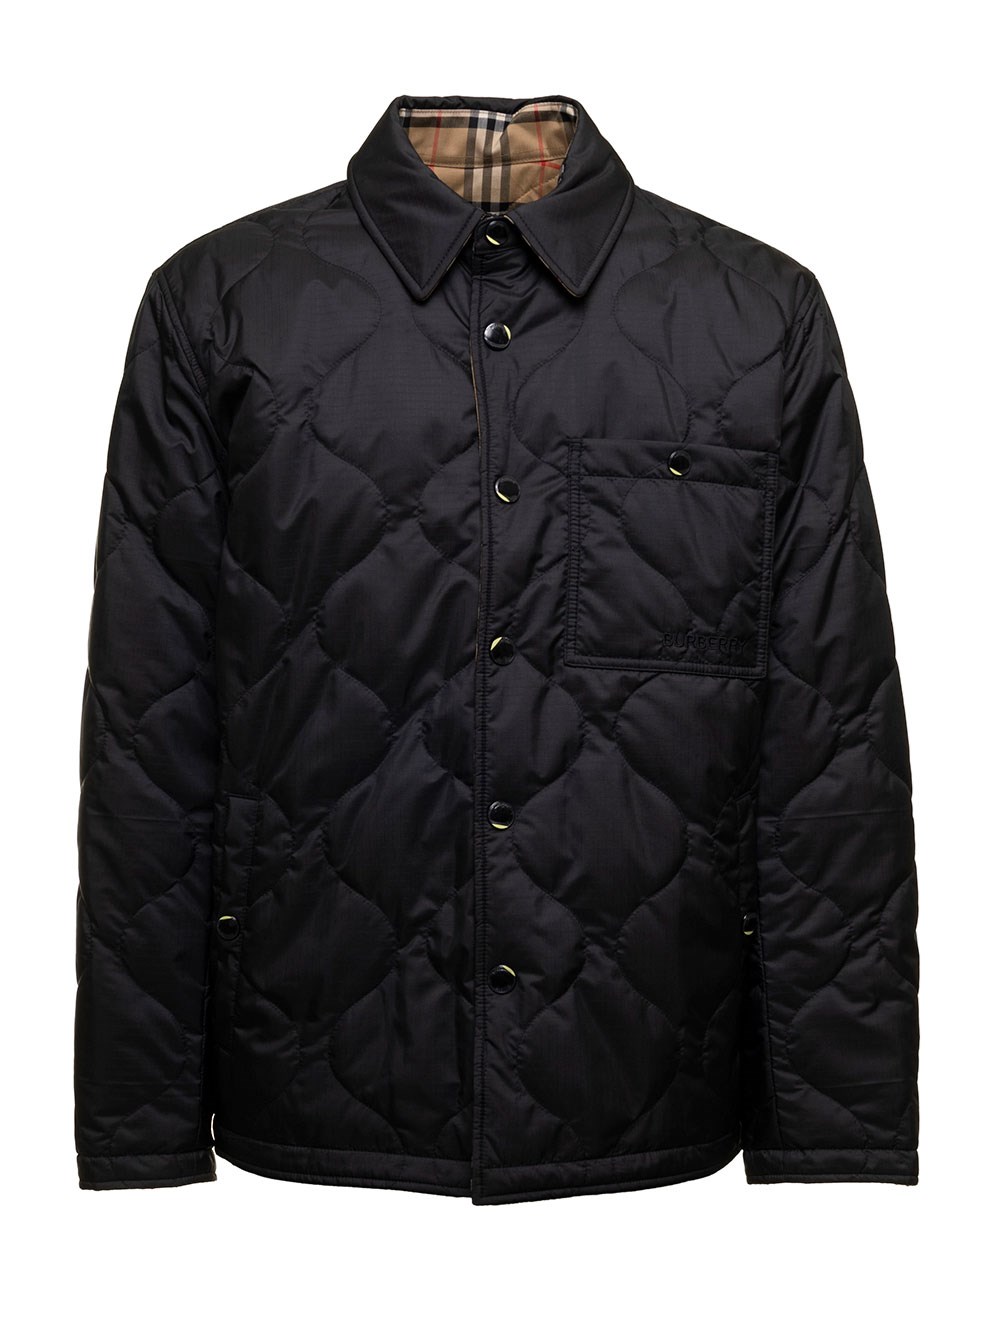 Burberry Man's Reversible Quilted Nylon Jacket Black available on ...